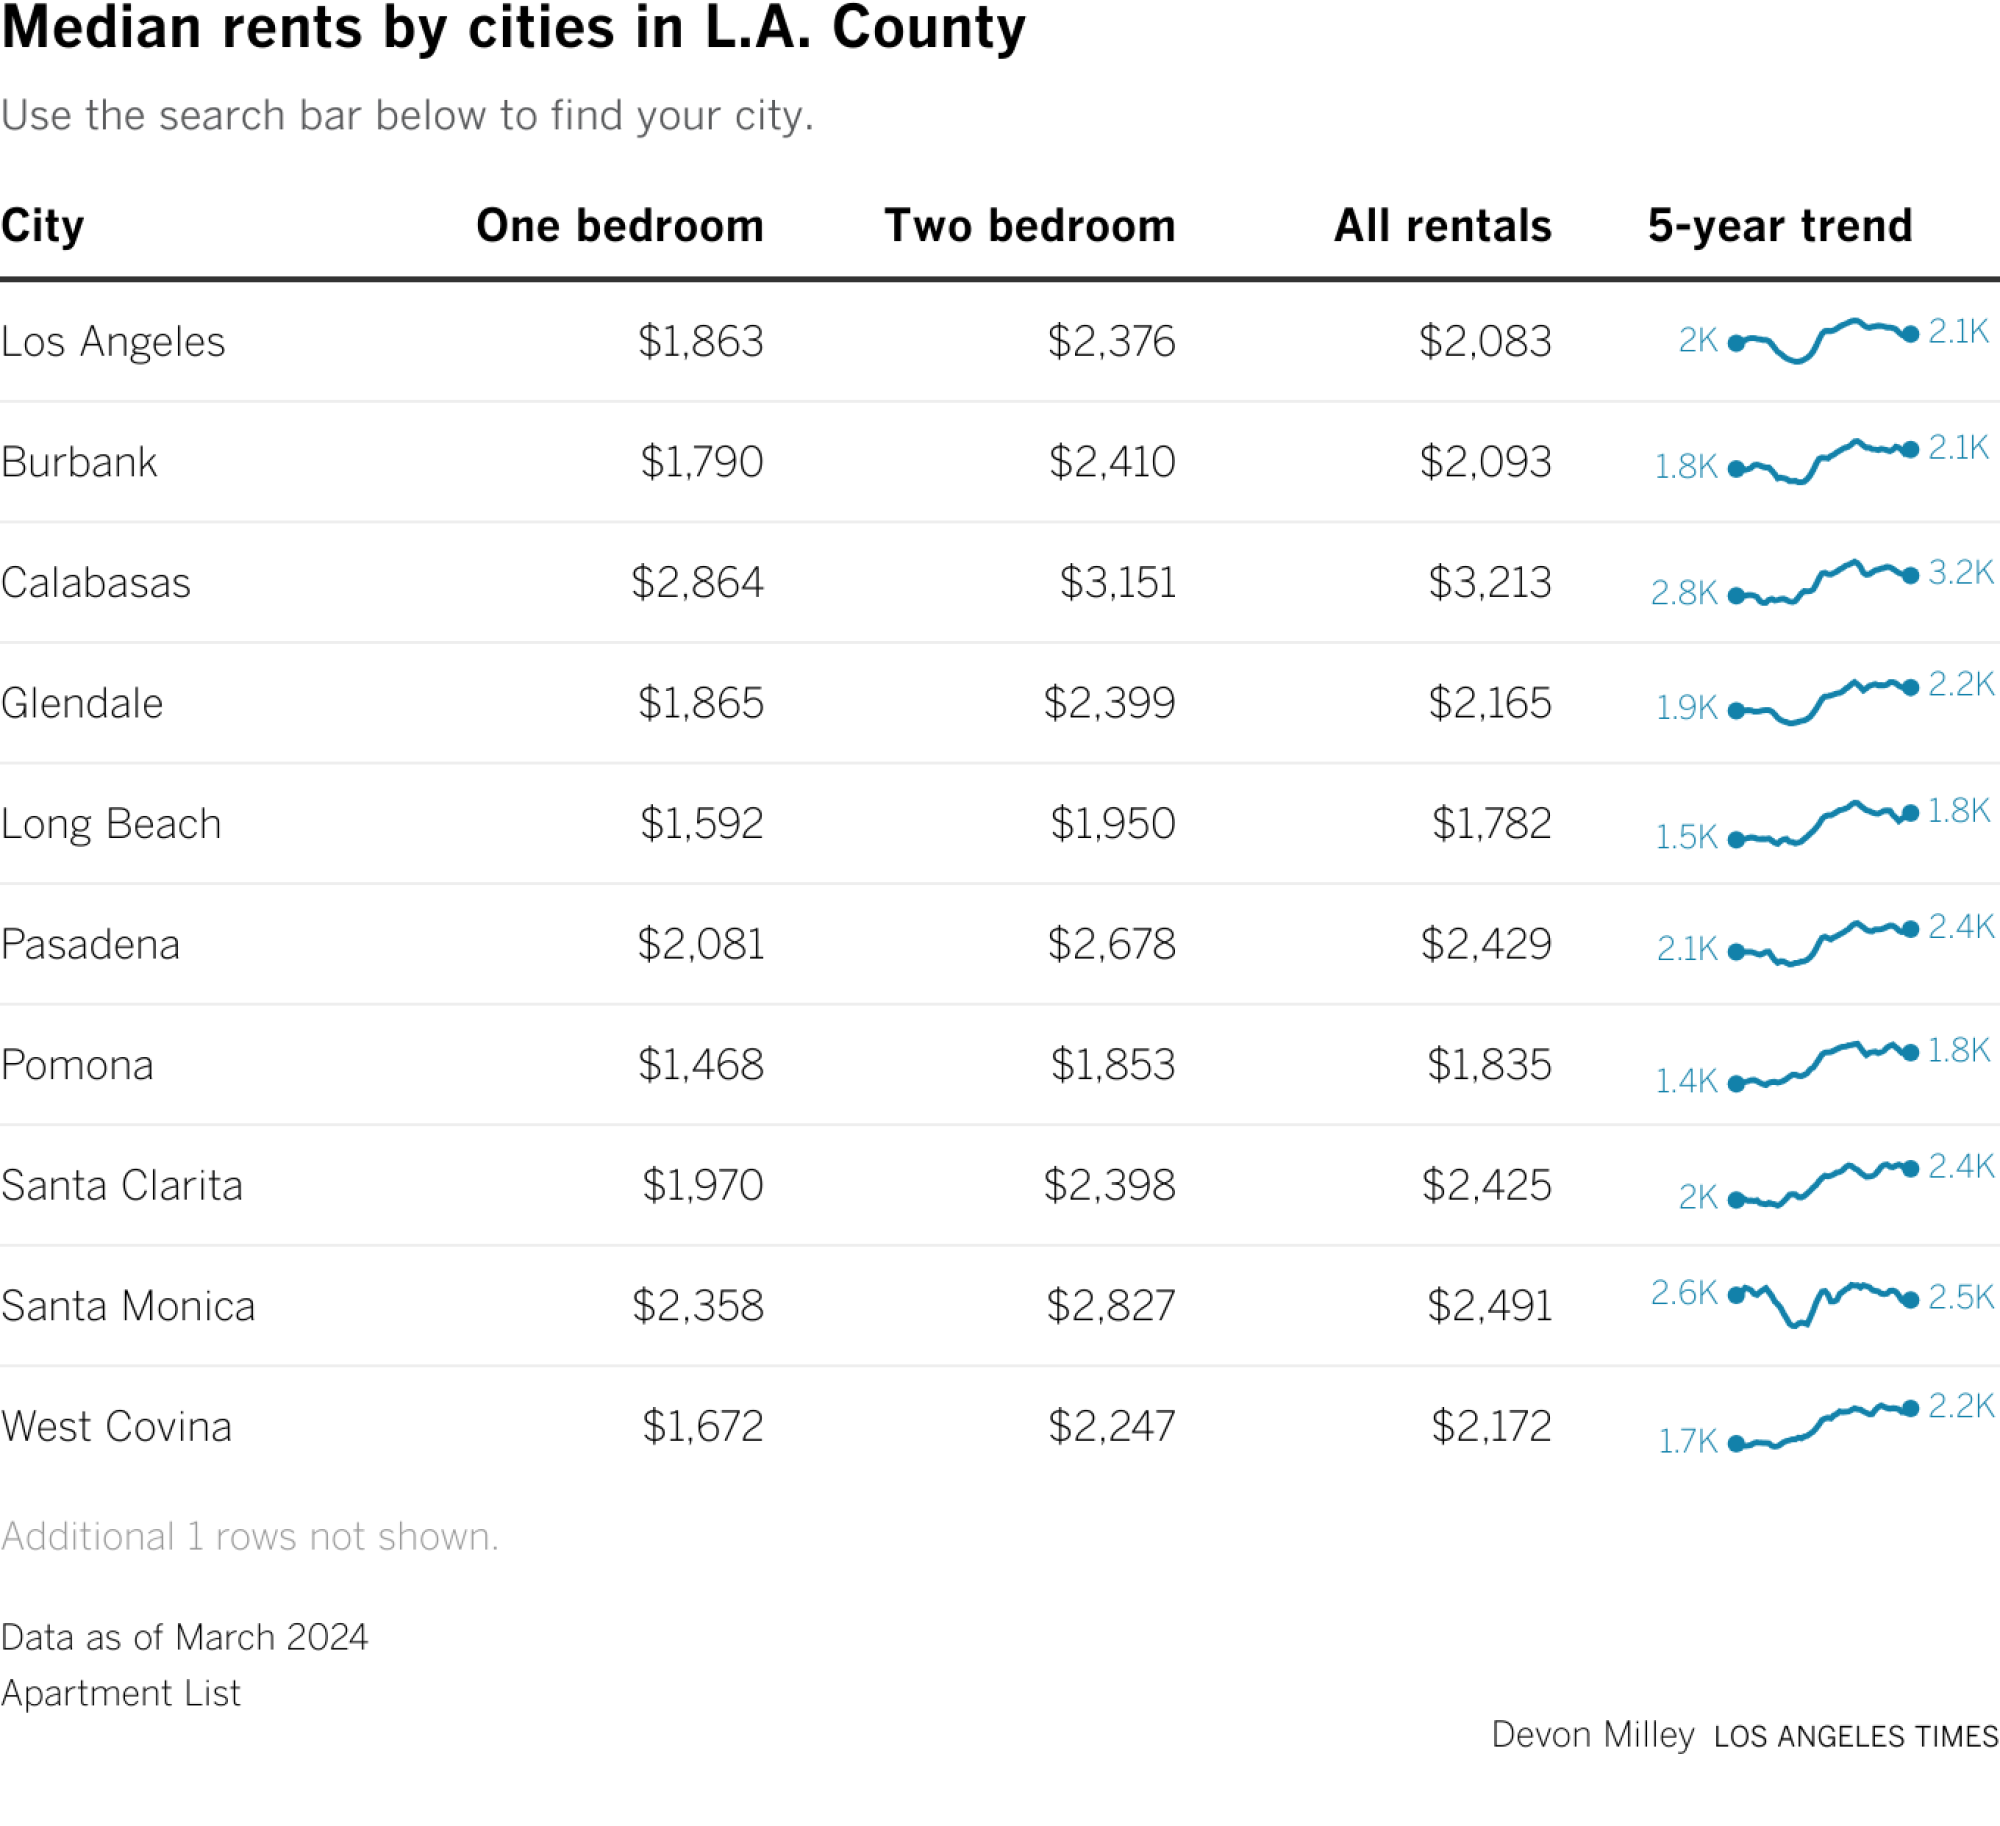 Table of apartment rental prices for cities in Los Angeles County